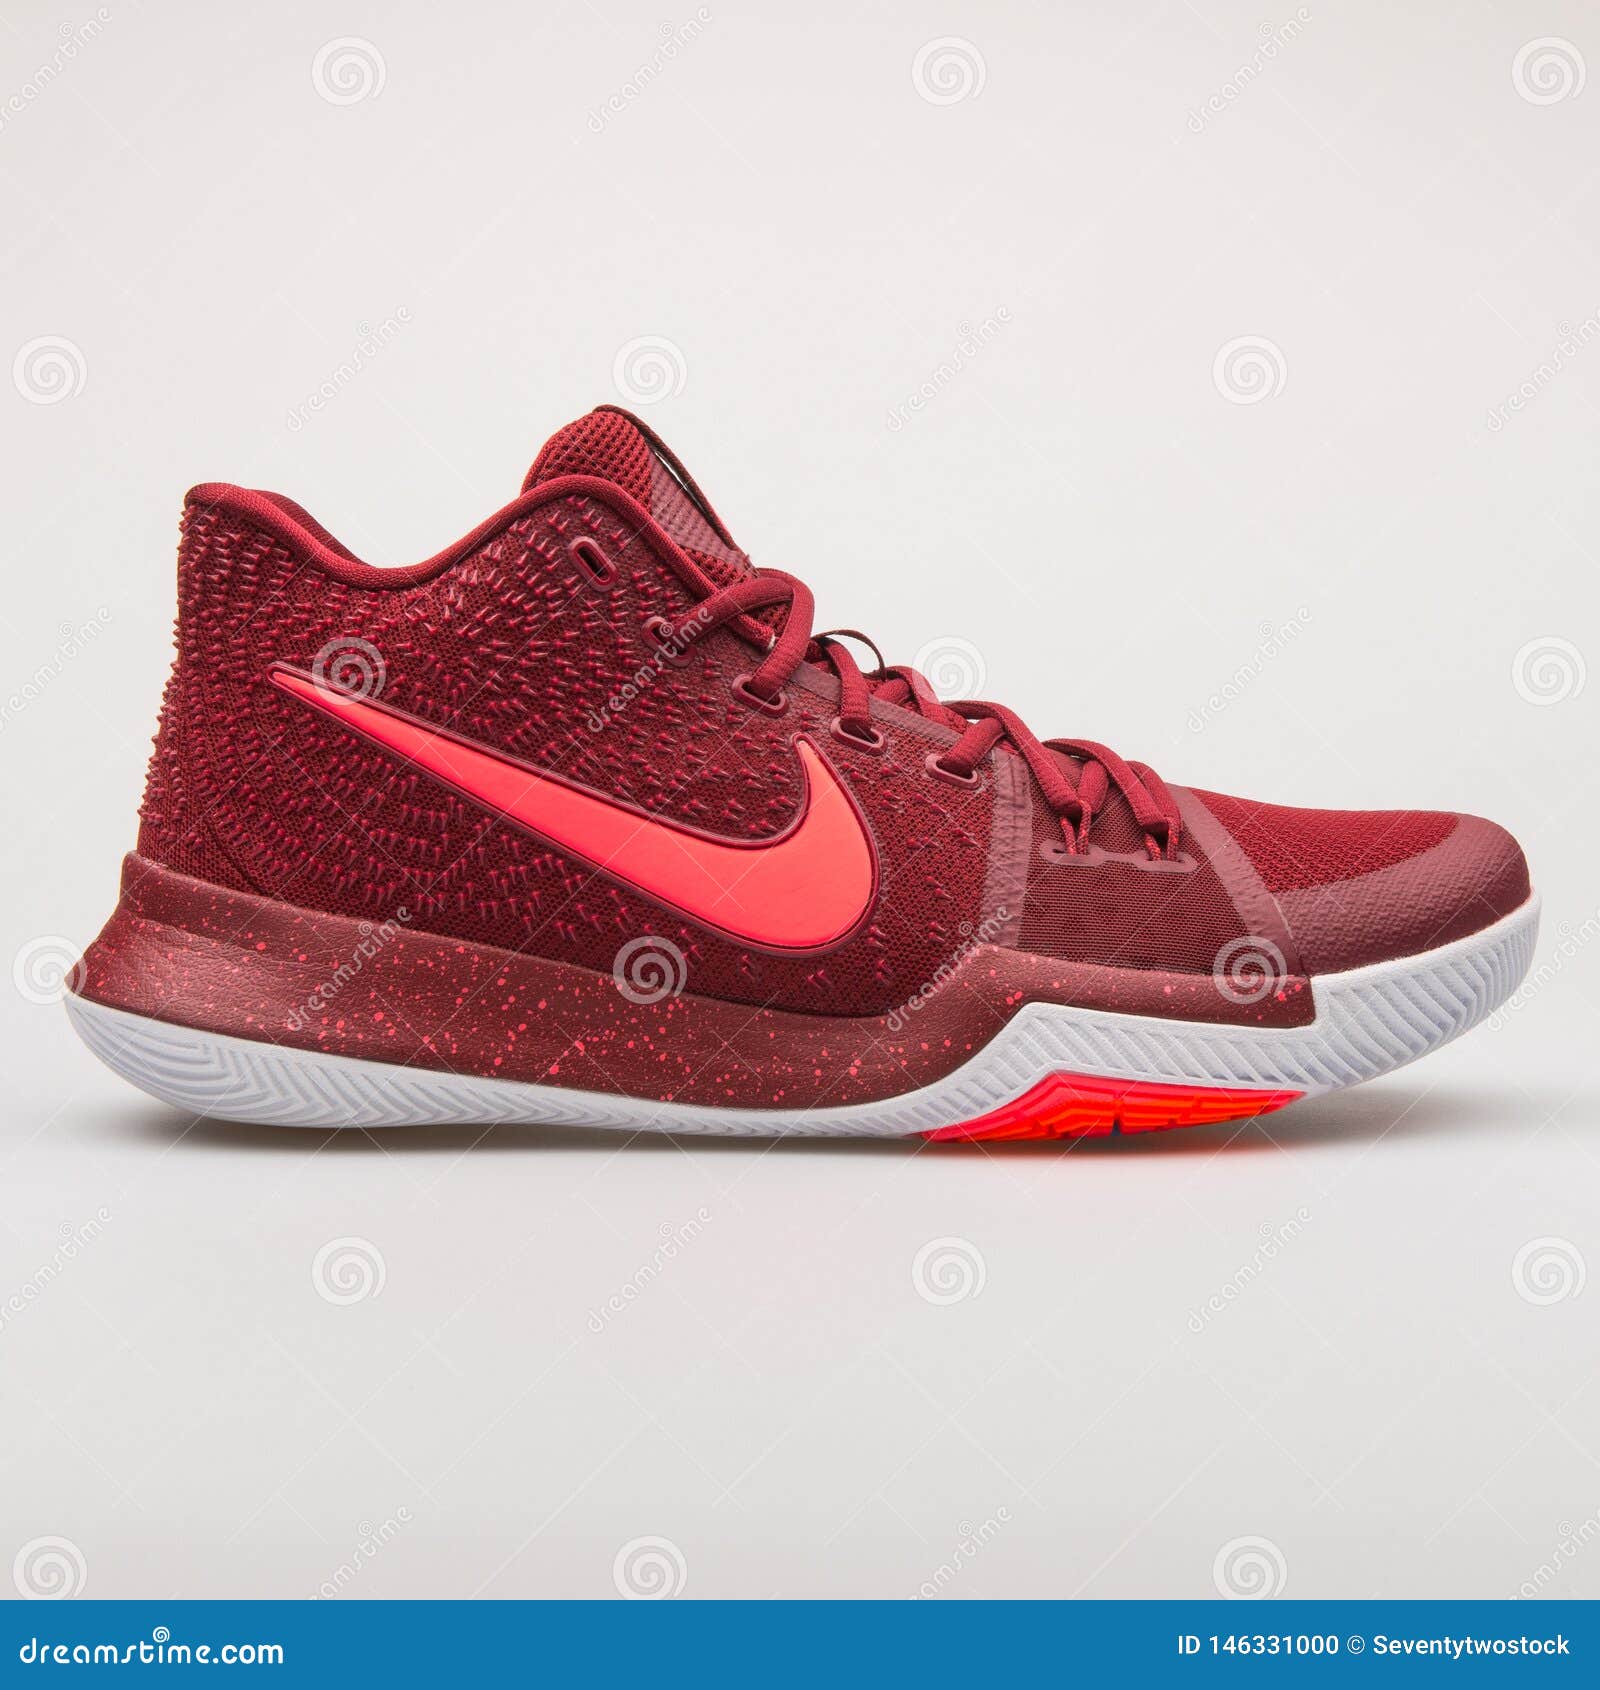 kyrie 3 red white